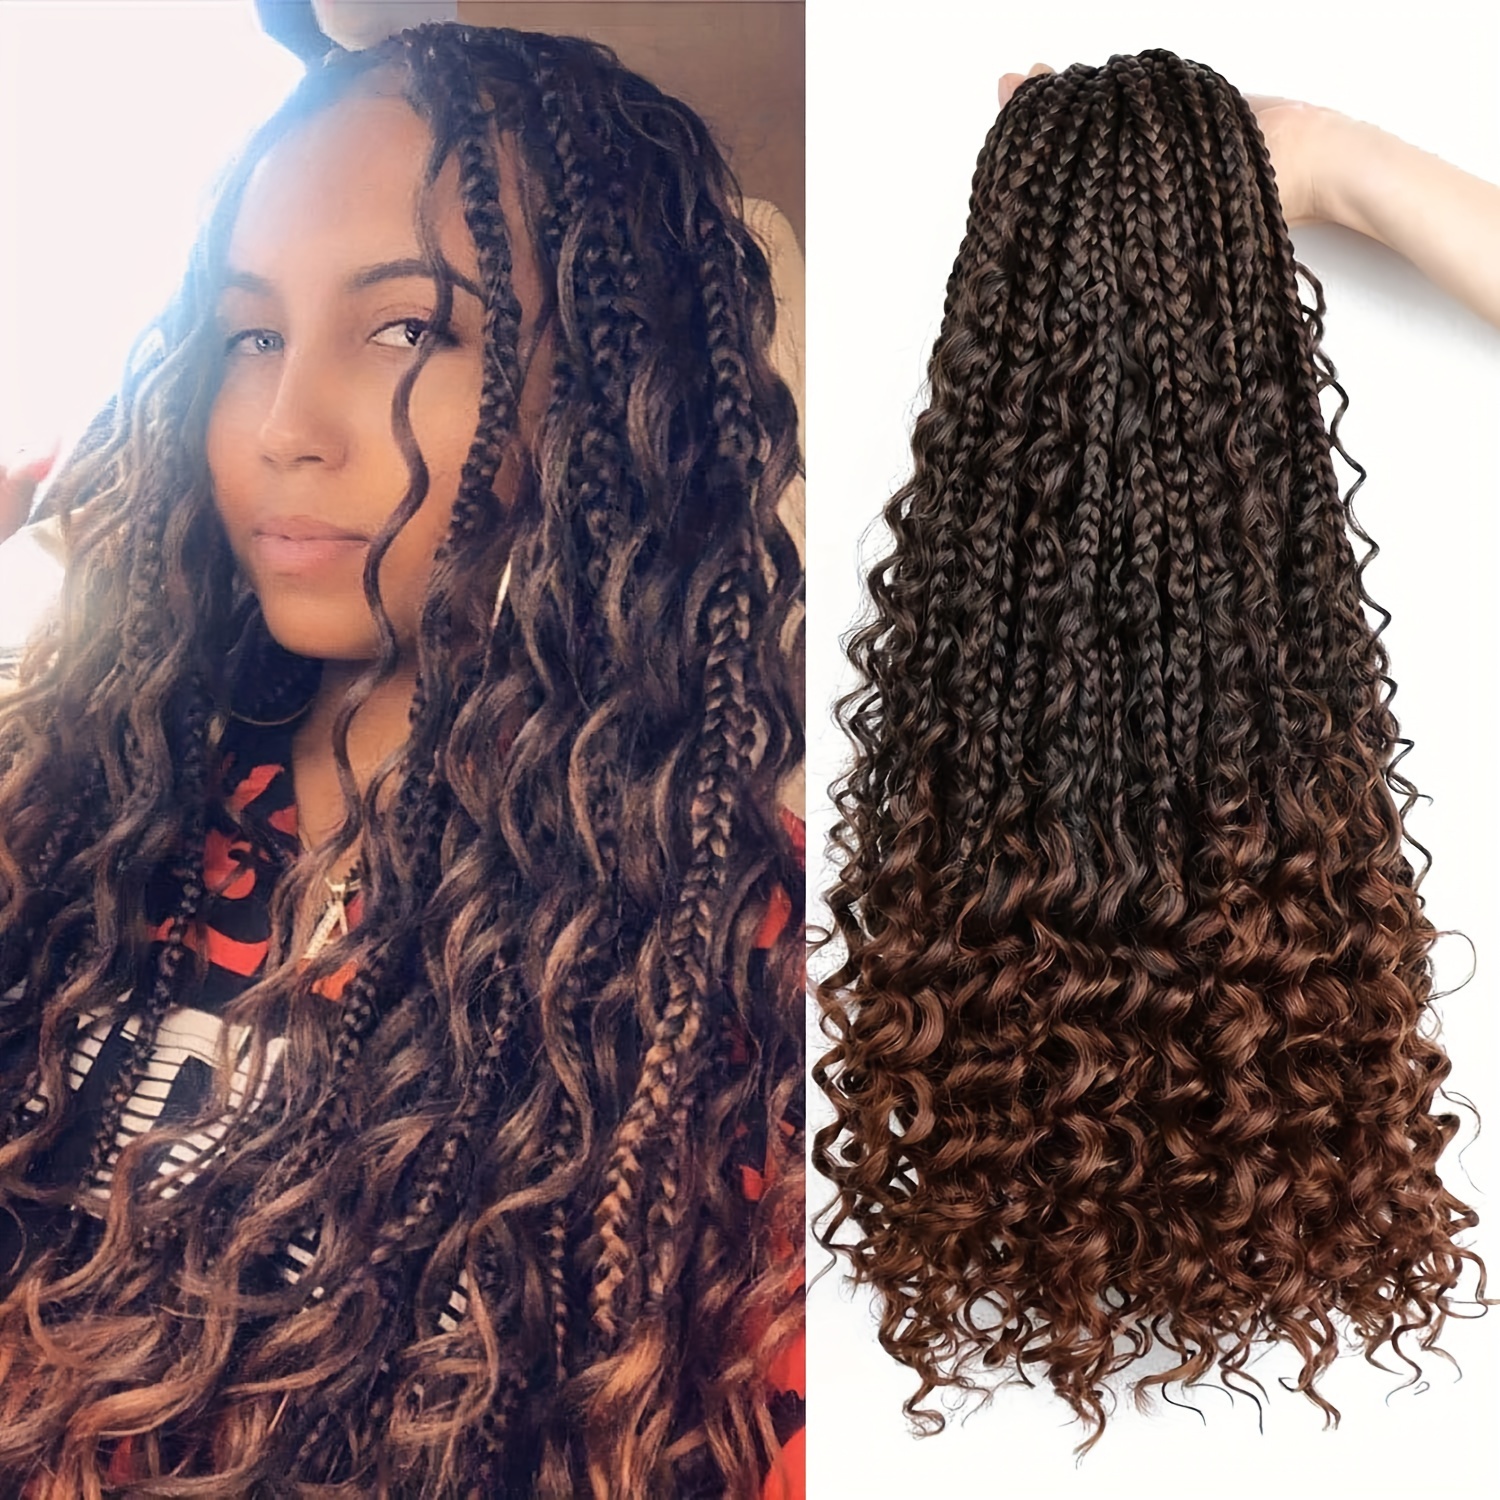 Goddess Boho Crochet Box Braids with Curly Ends - Pre-Looped Synthetic Hair  Extensions, 3X Braid Pack